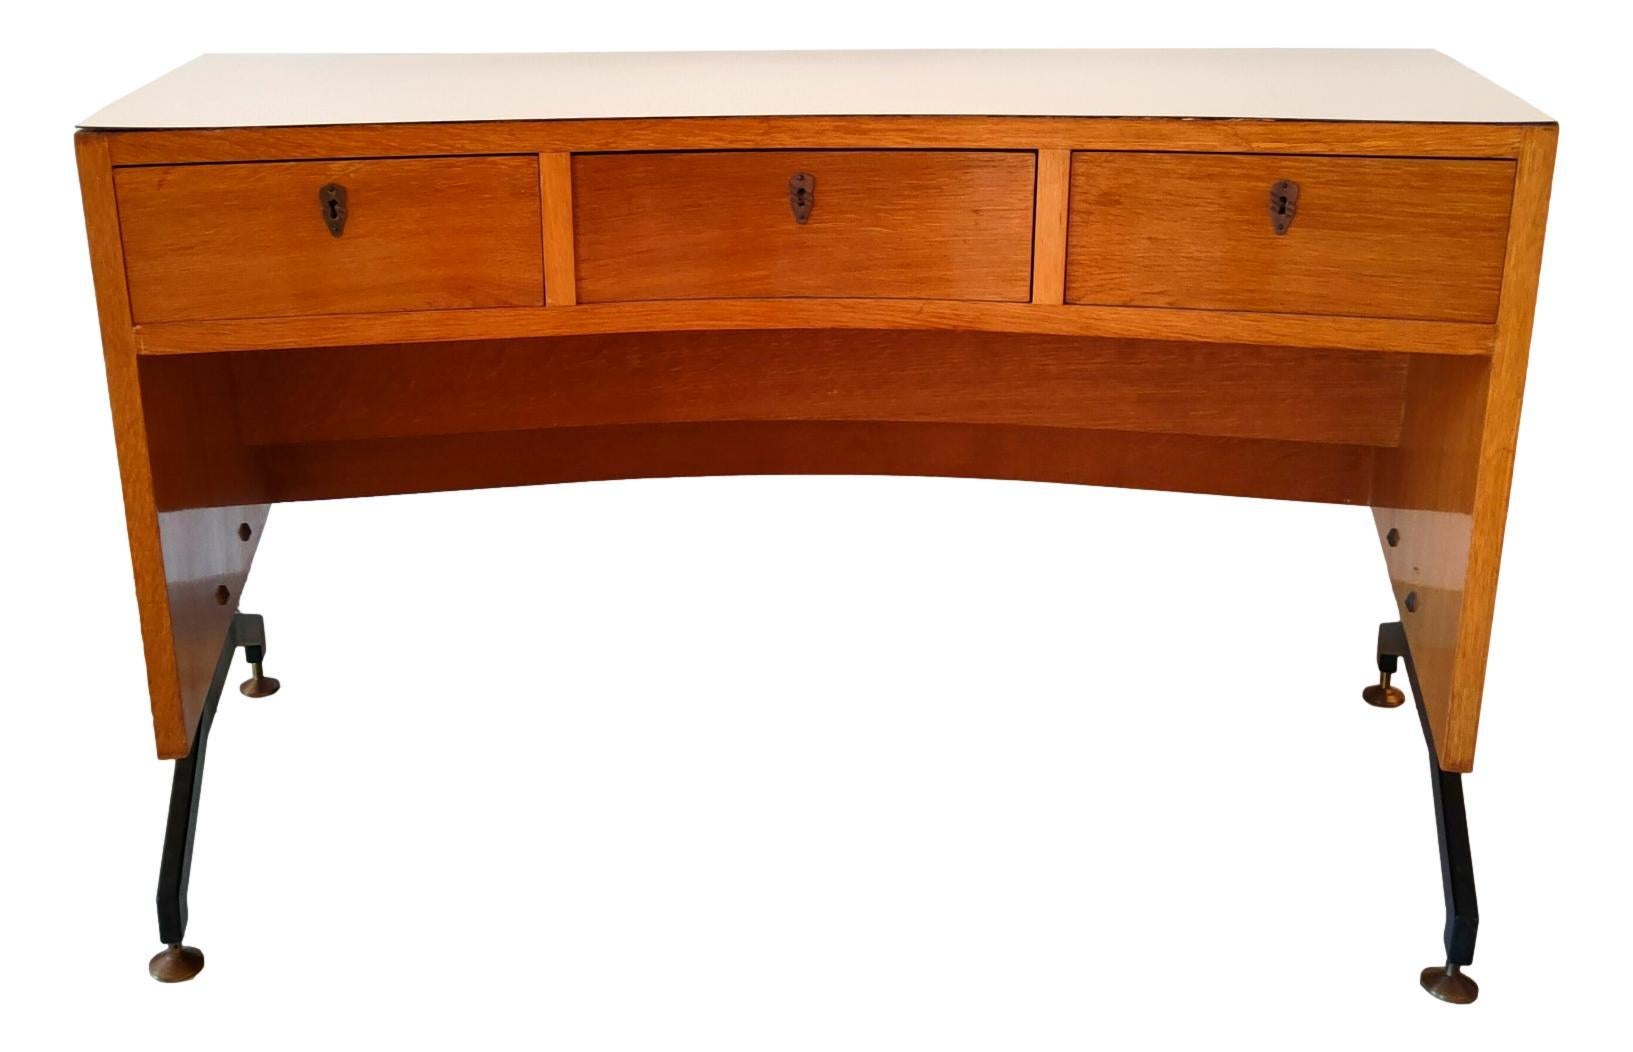 Original 60s curved desk, probable production I.S.A. Bergamo.

Structure in fir wood with veneers and top in beige formica, feet in metal structure with brass terminals.

Front with three drawers, back with shelf cantilever.

Measuring 70 cm